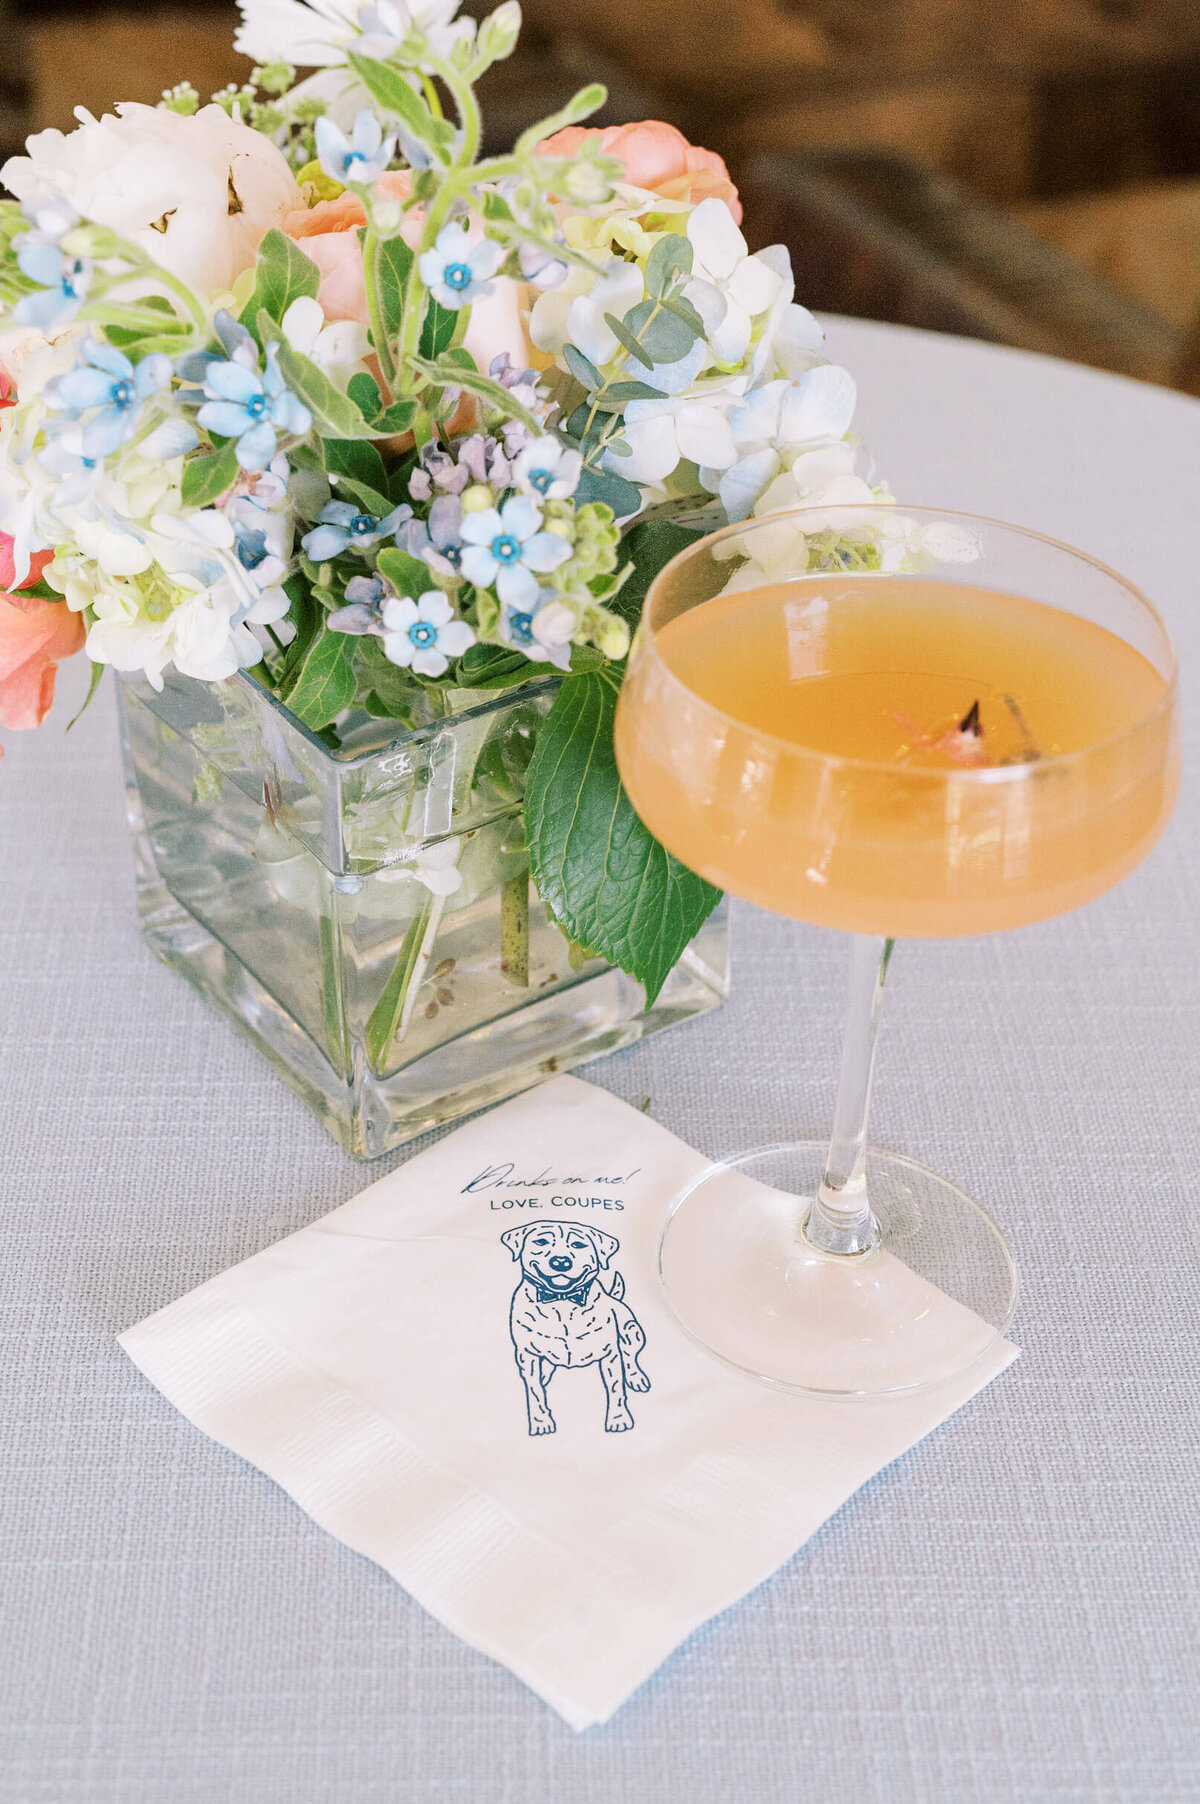 Signature cocktail with personalized napkin